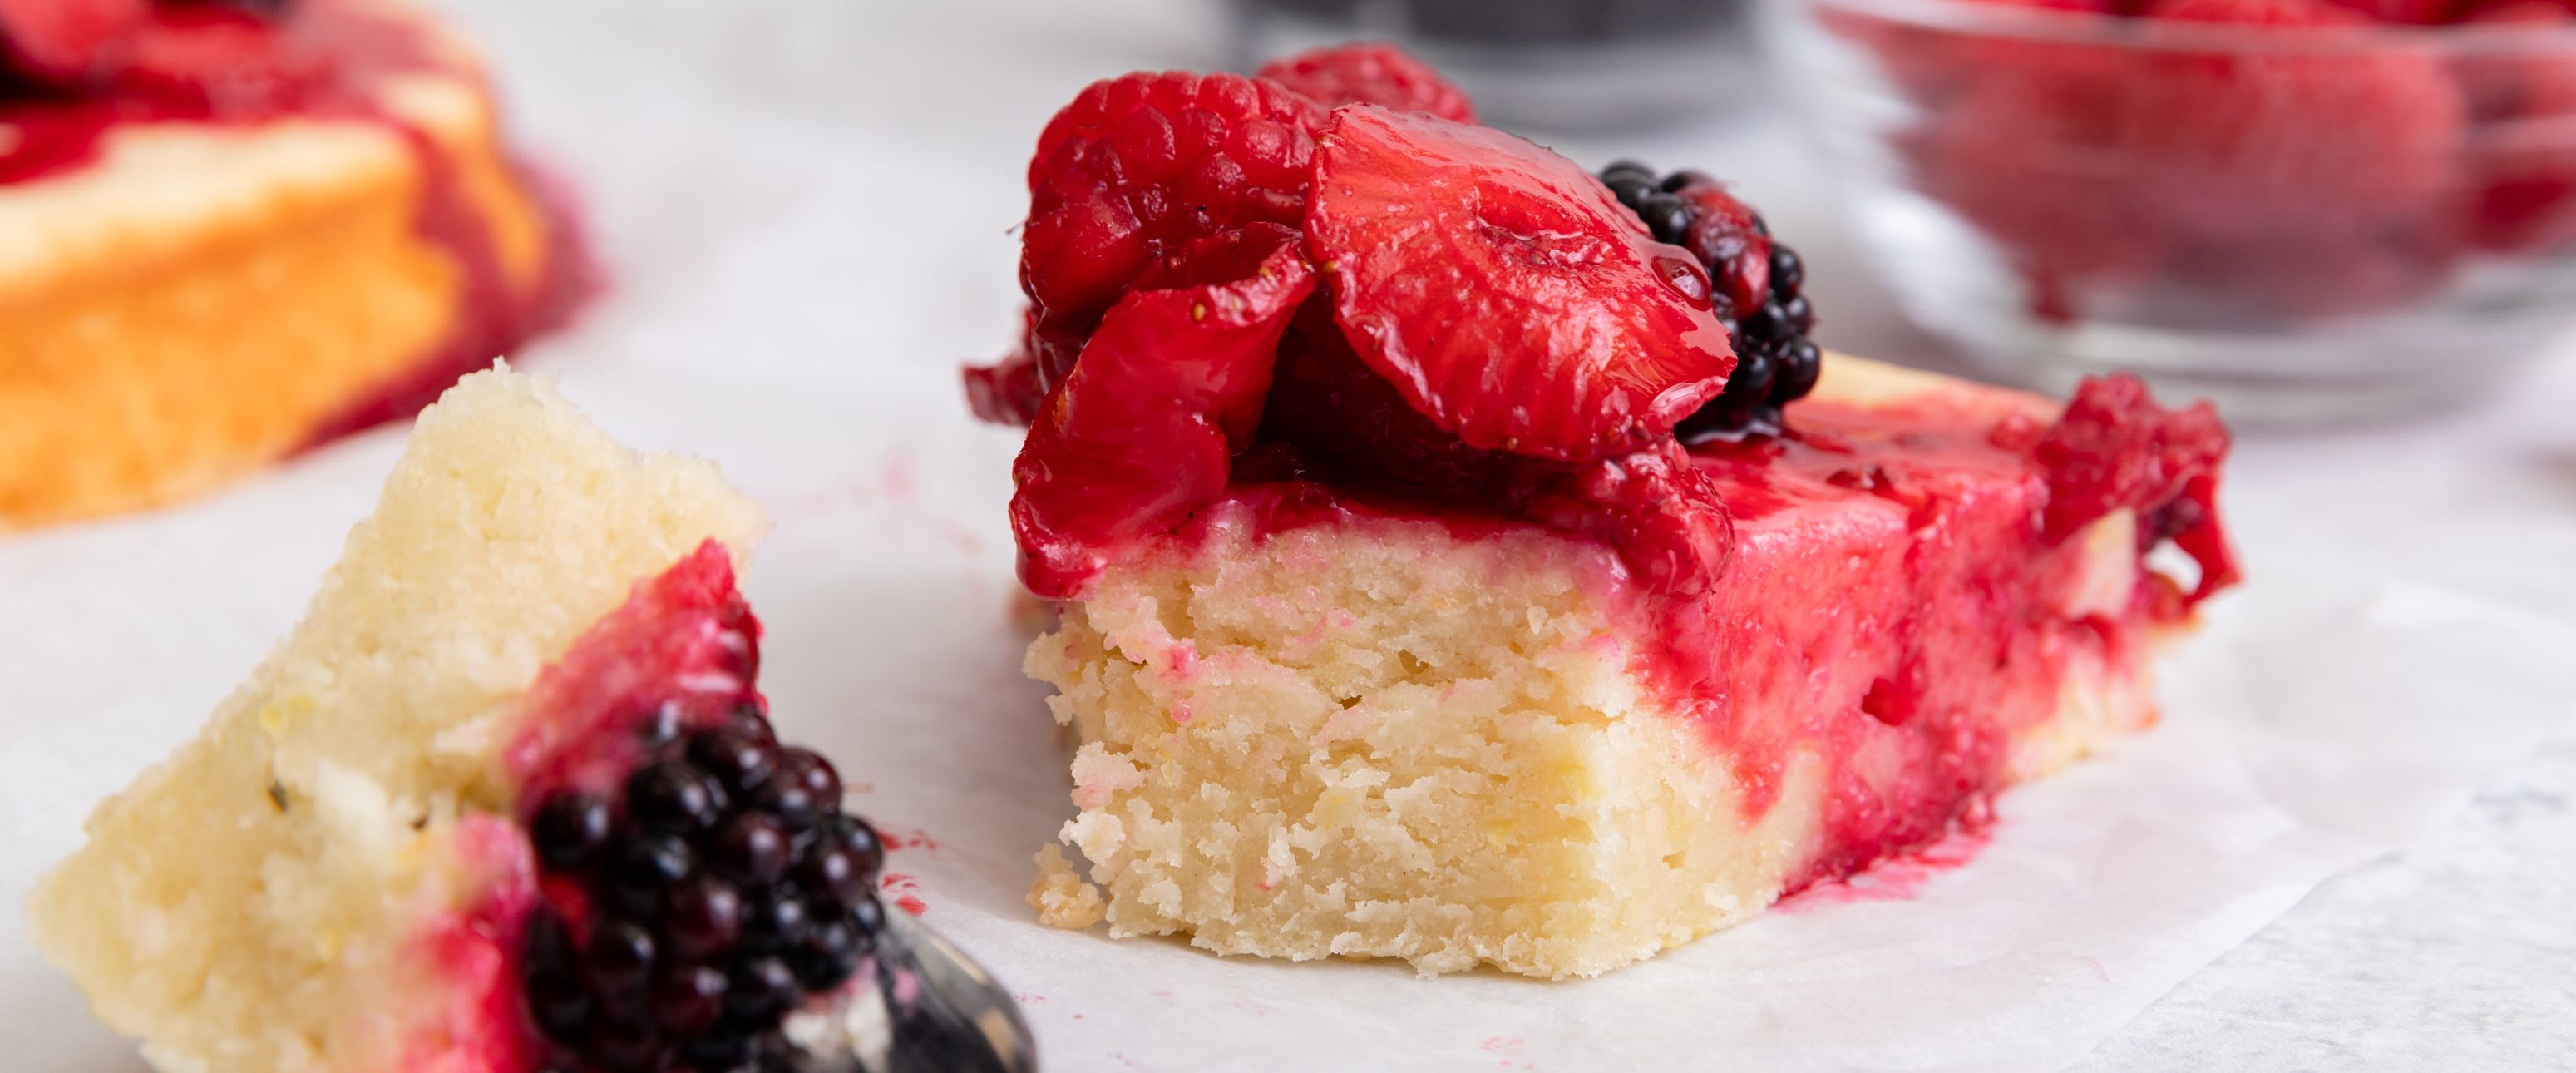 Sour Cream Cake With Mixed Berry Compote Fage Yogurt 